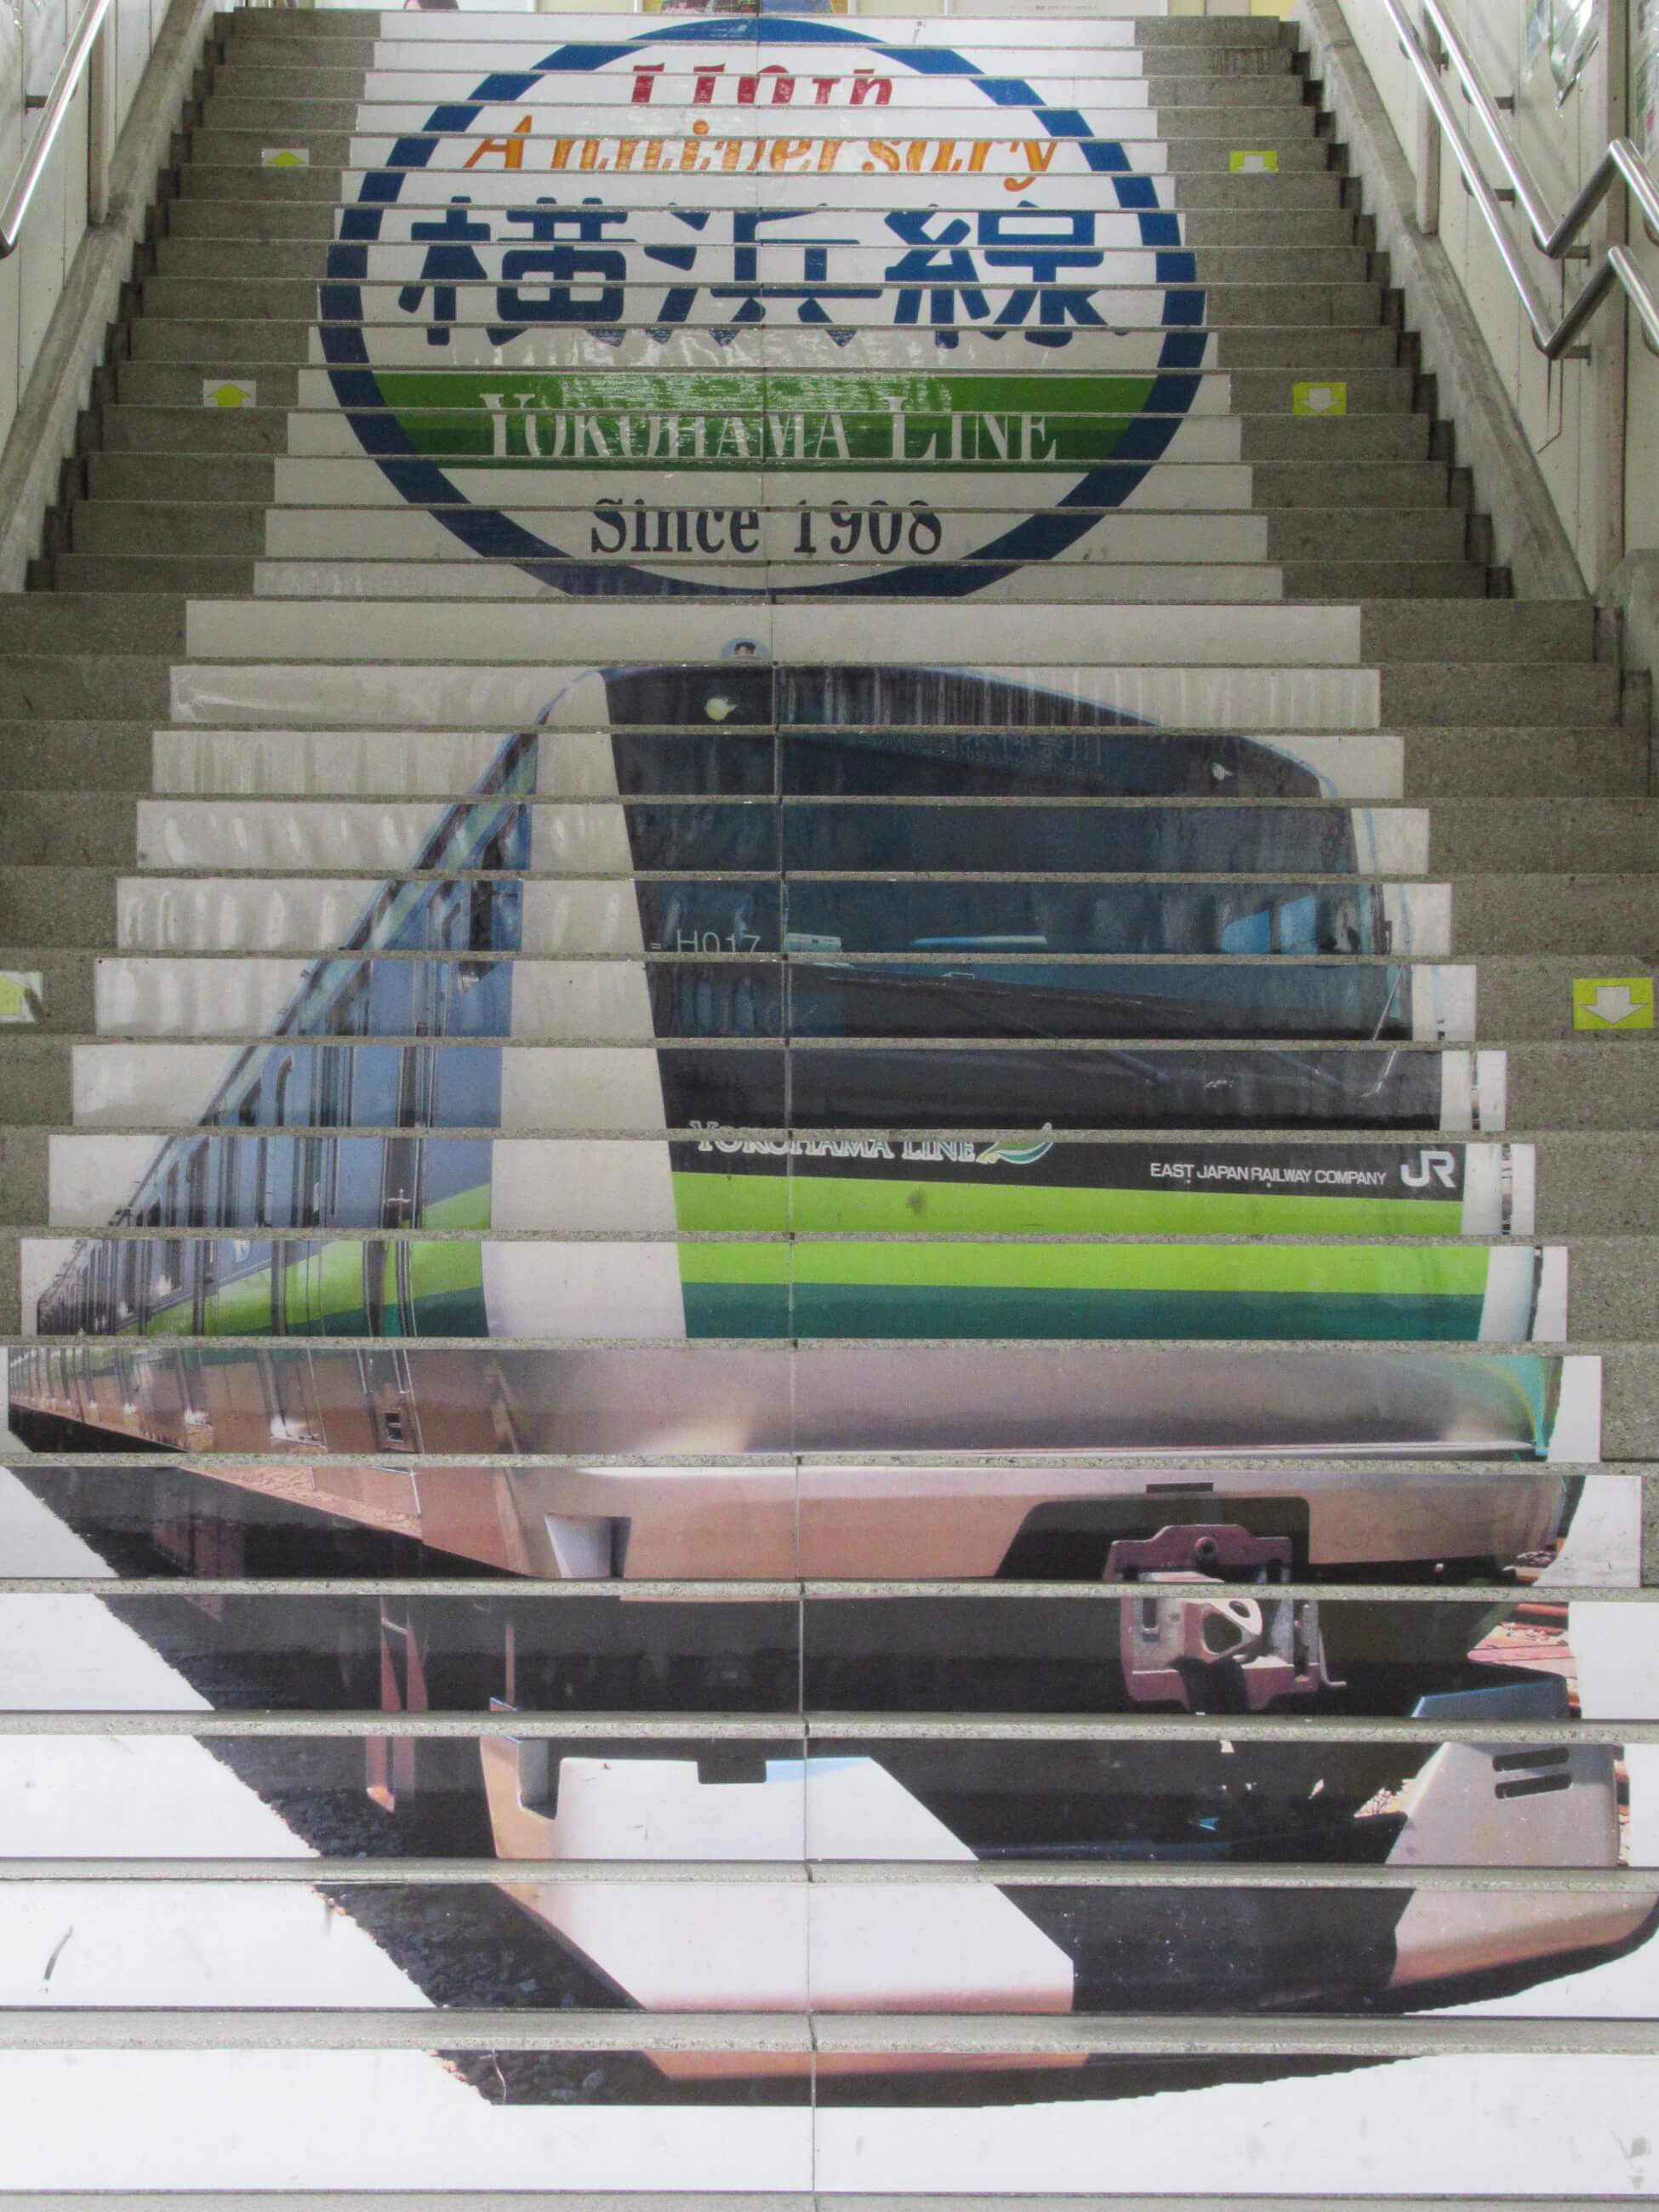 A picture of the stairs at Higashi Kanagawa station on the 110th anniversary of Yokohama Line